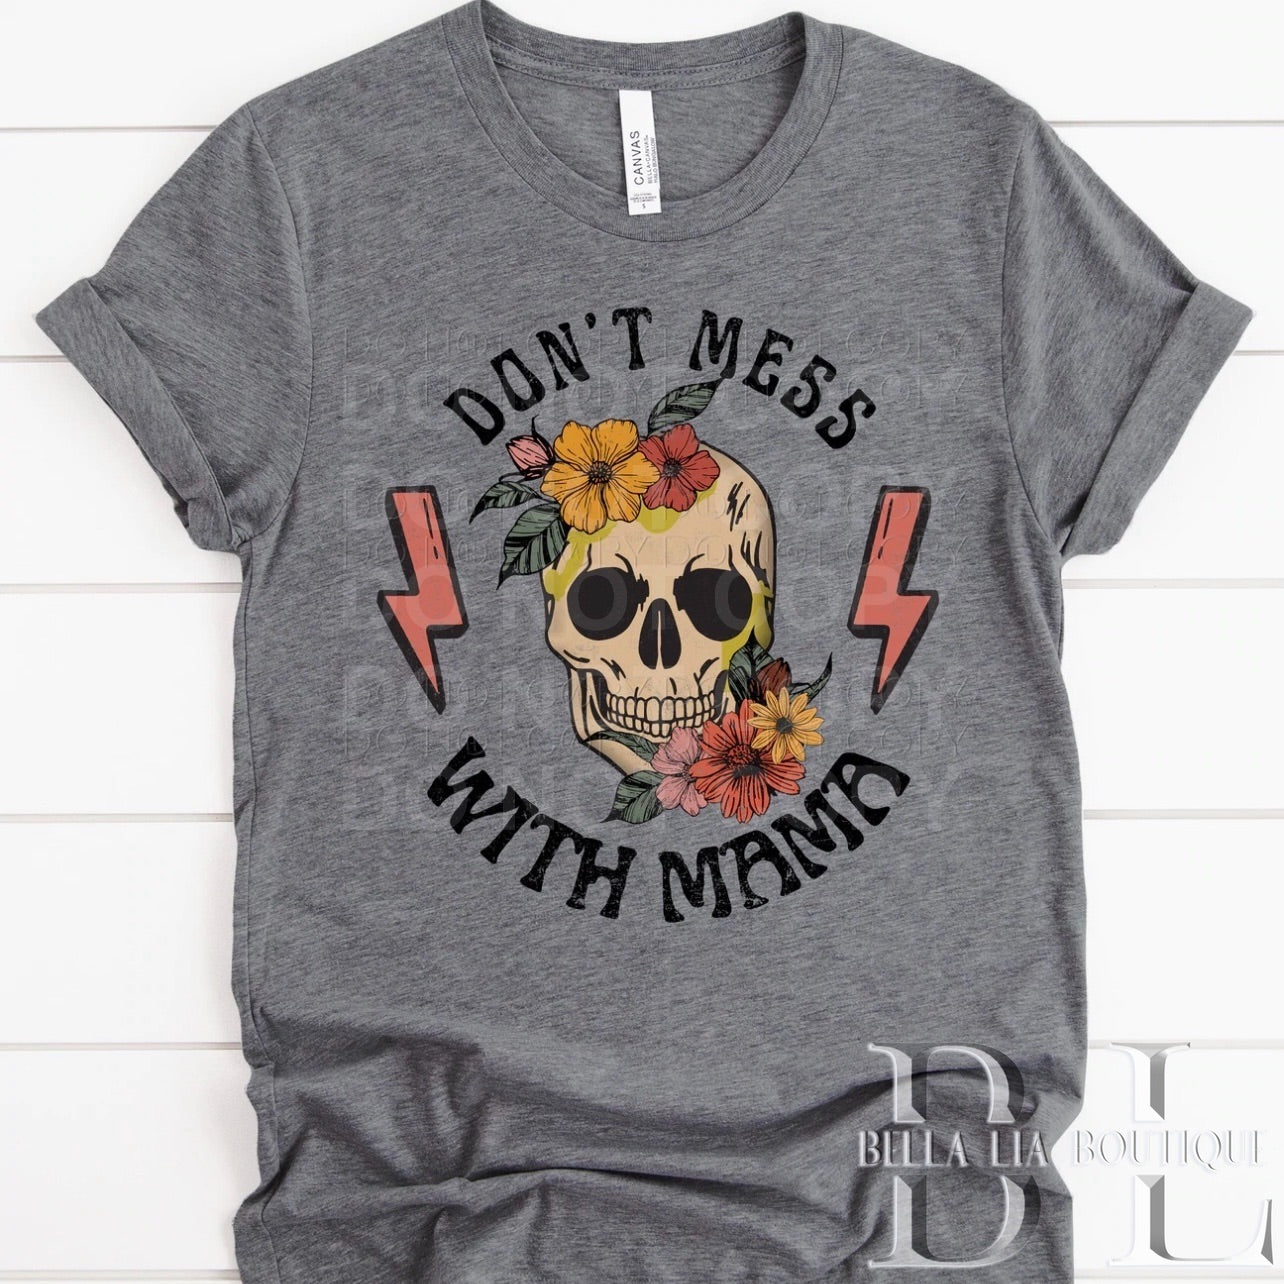 Don’t Mess with Mama Graphic Tee or Sweatshirt - Bella Lia Boutique